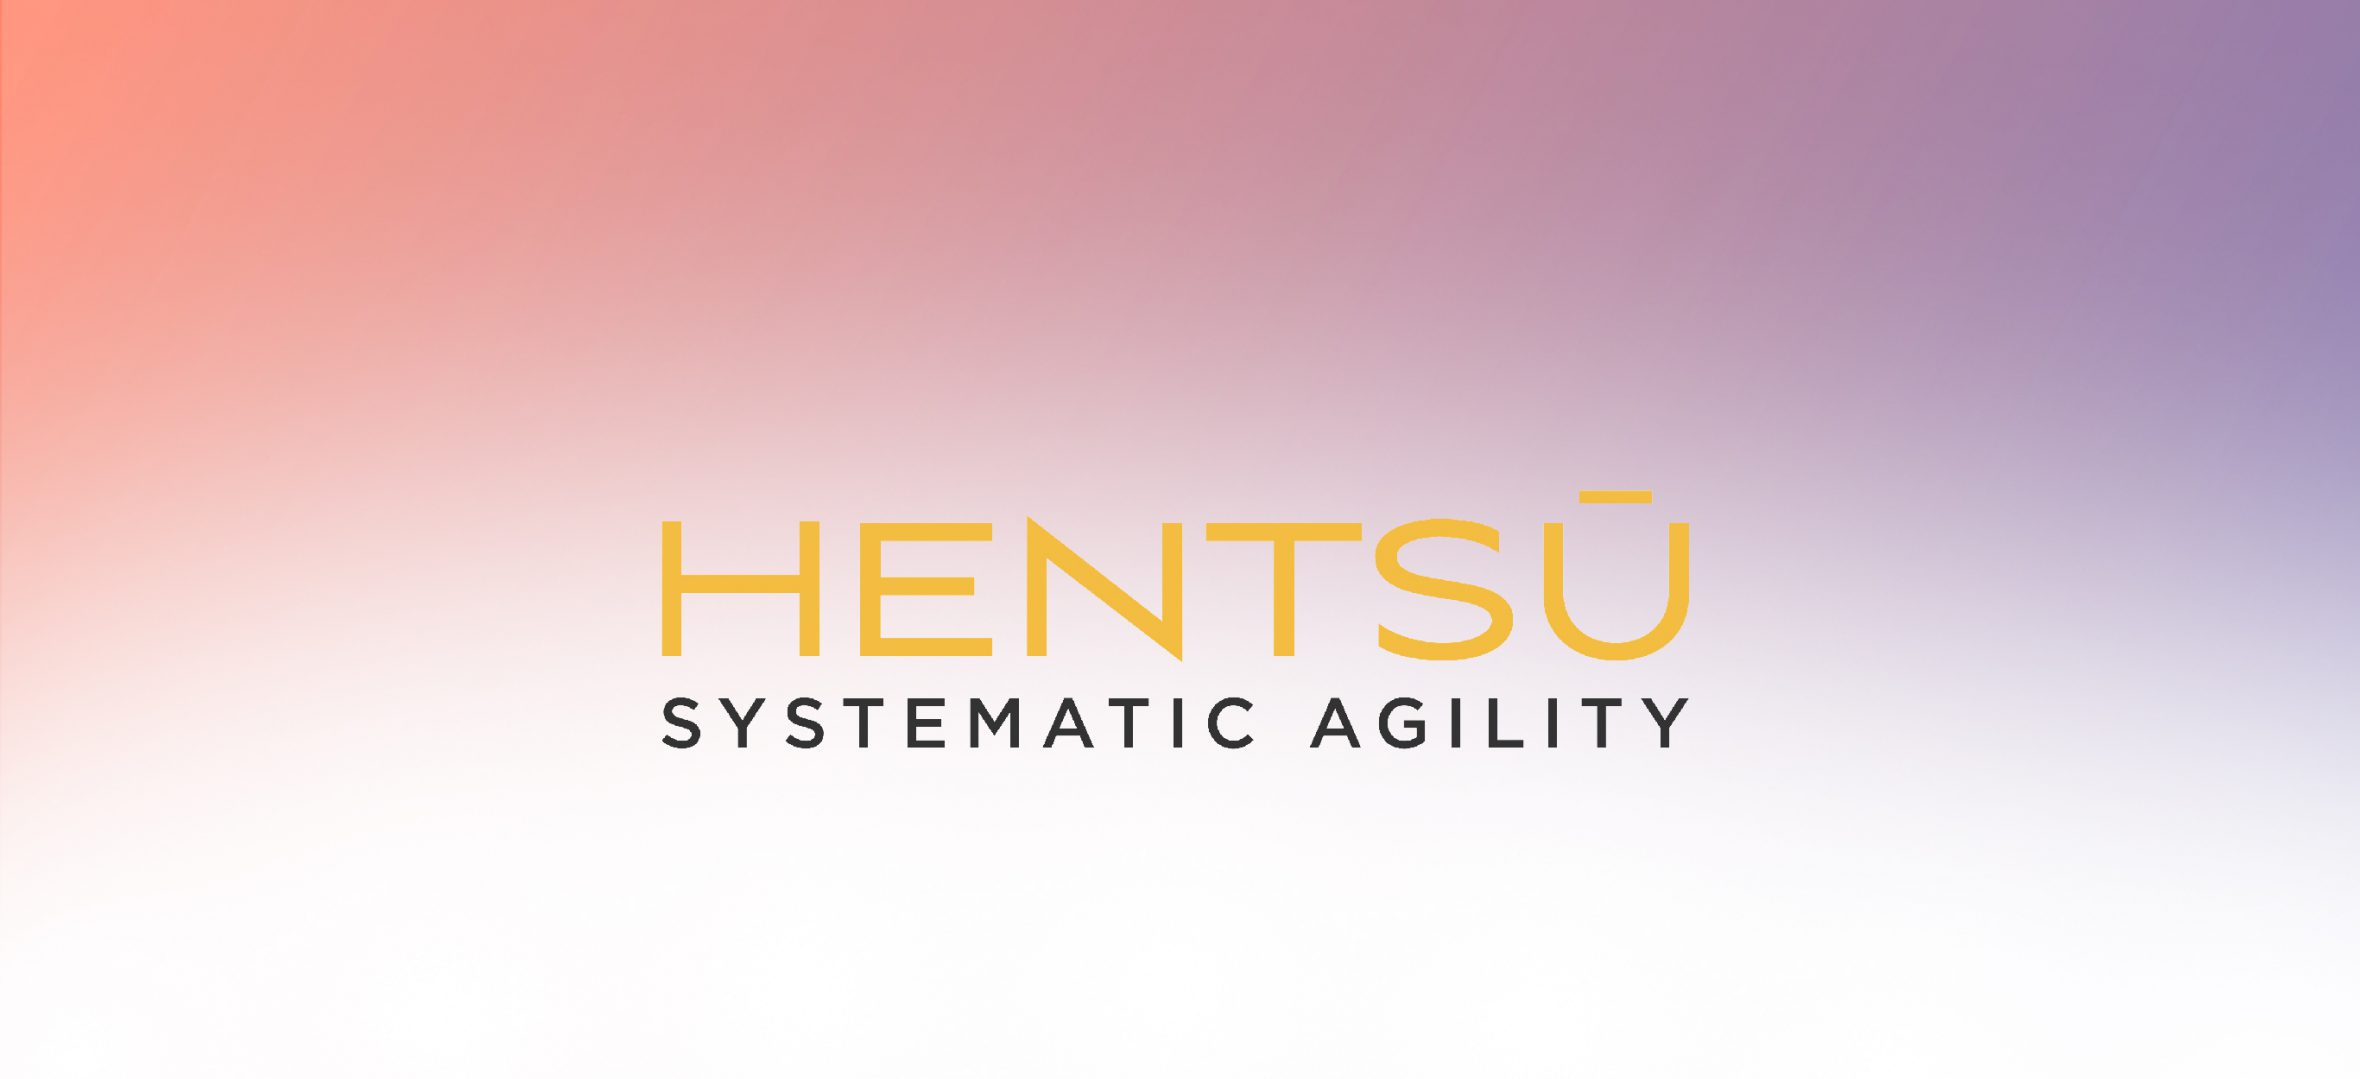 Hedge Fund Cloud Specialist Hentsu Selects Epsilon’s CloudLX for High Performance Cloud Connectivity